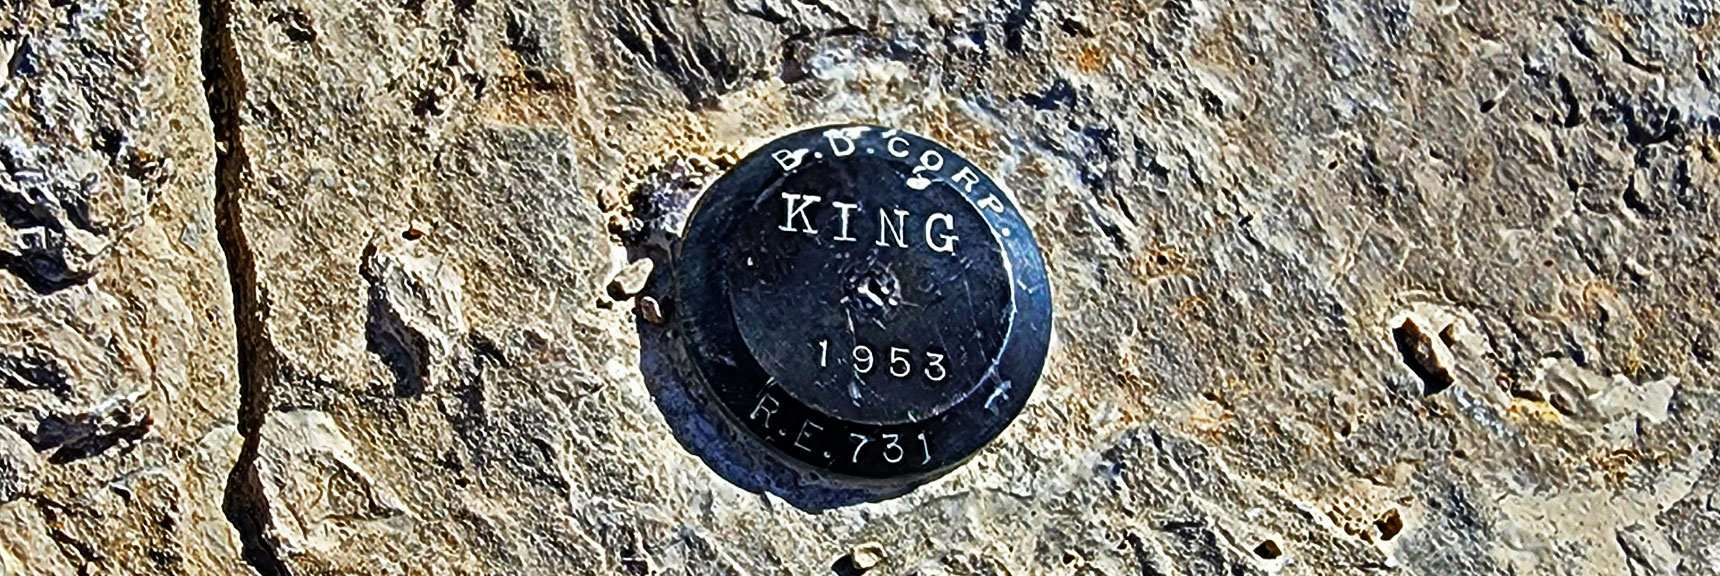 Marker Placed on Ridgeline's South High Point Back in 1953. | Western Outer Circuit | Blue Diamond Hill | Red Rock Canyon, Nevada